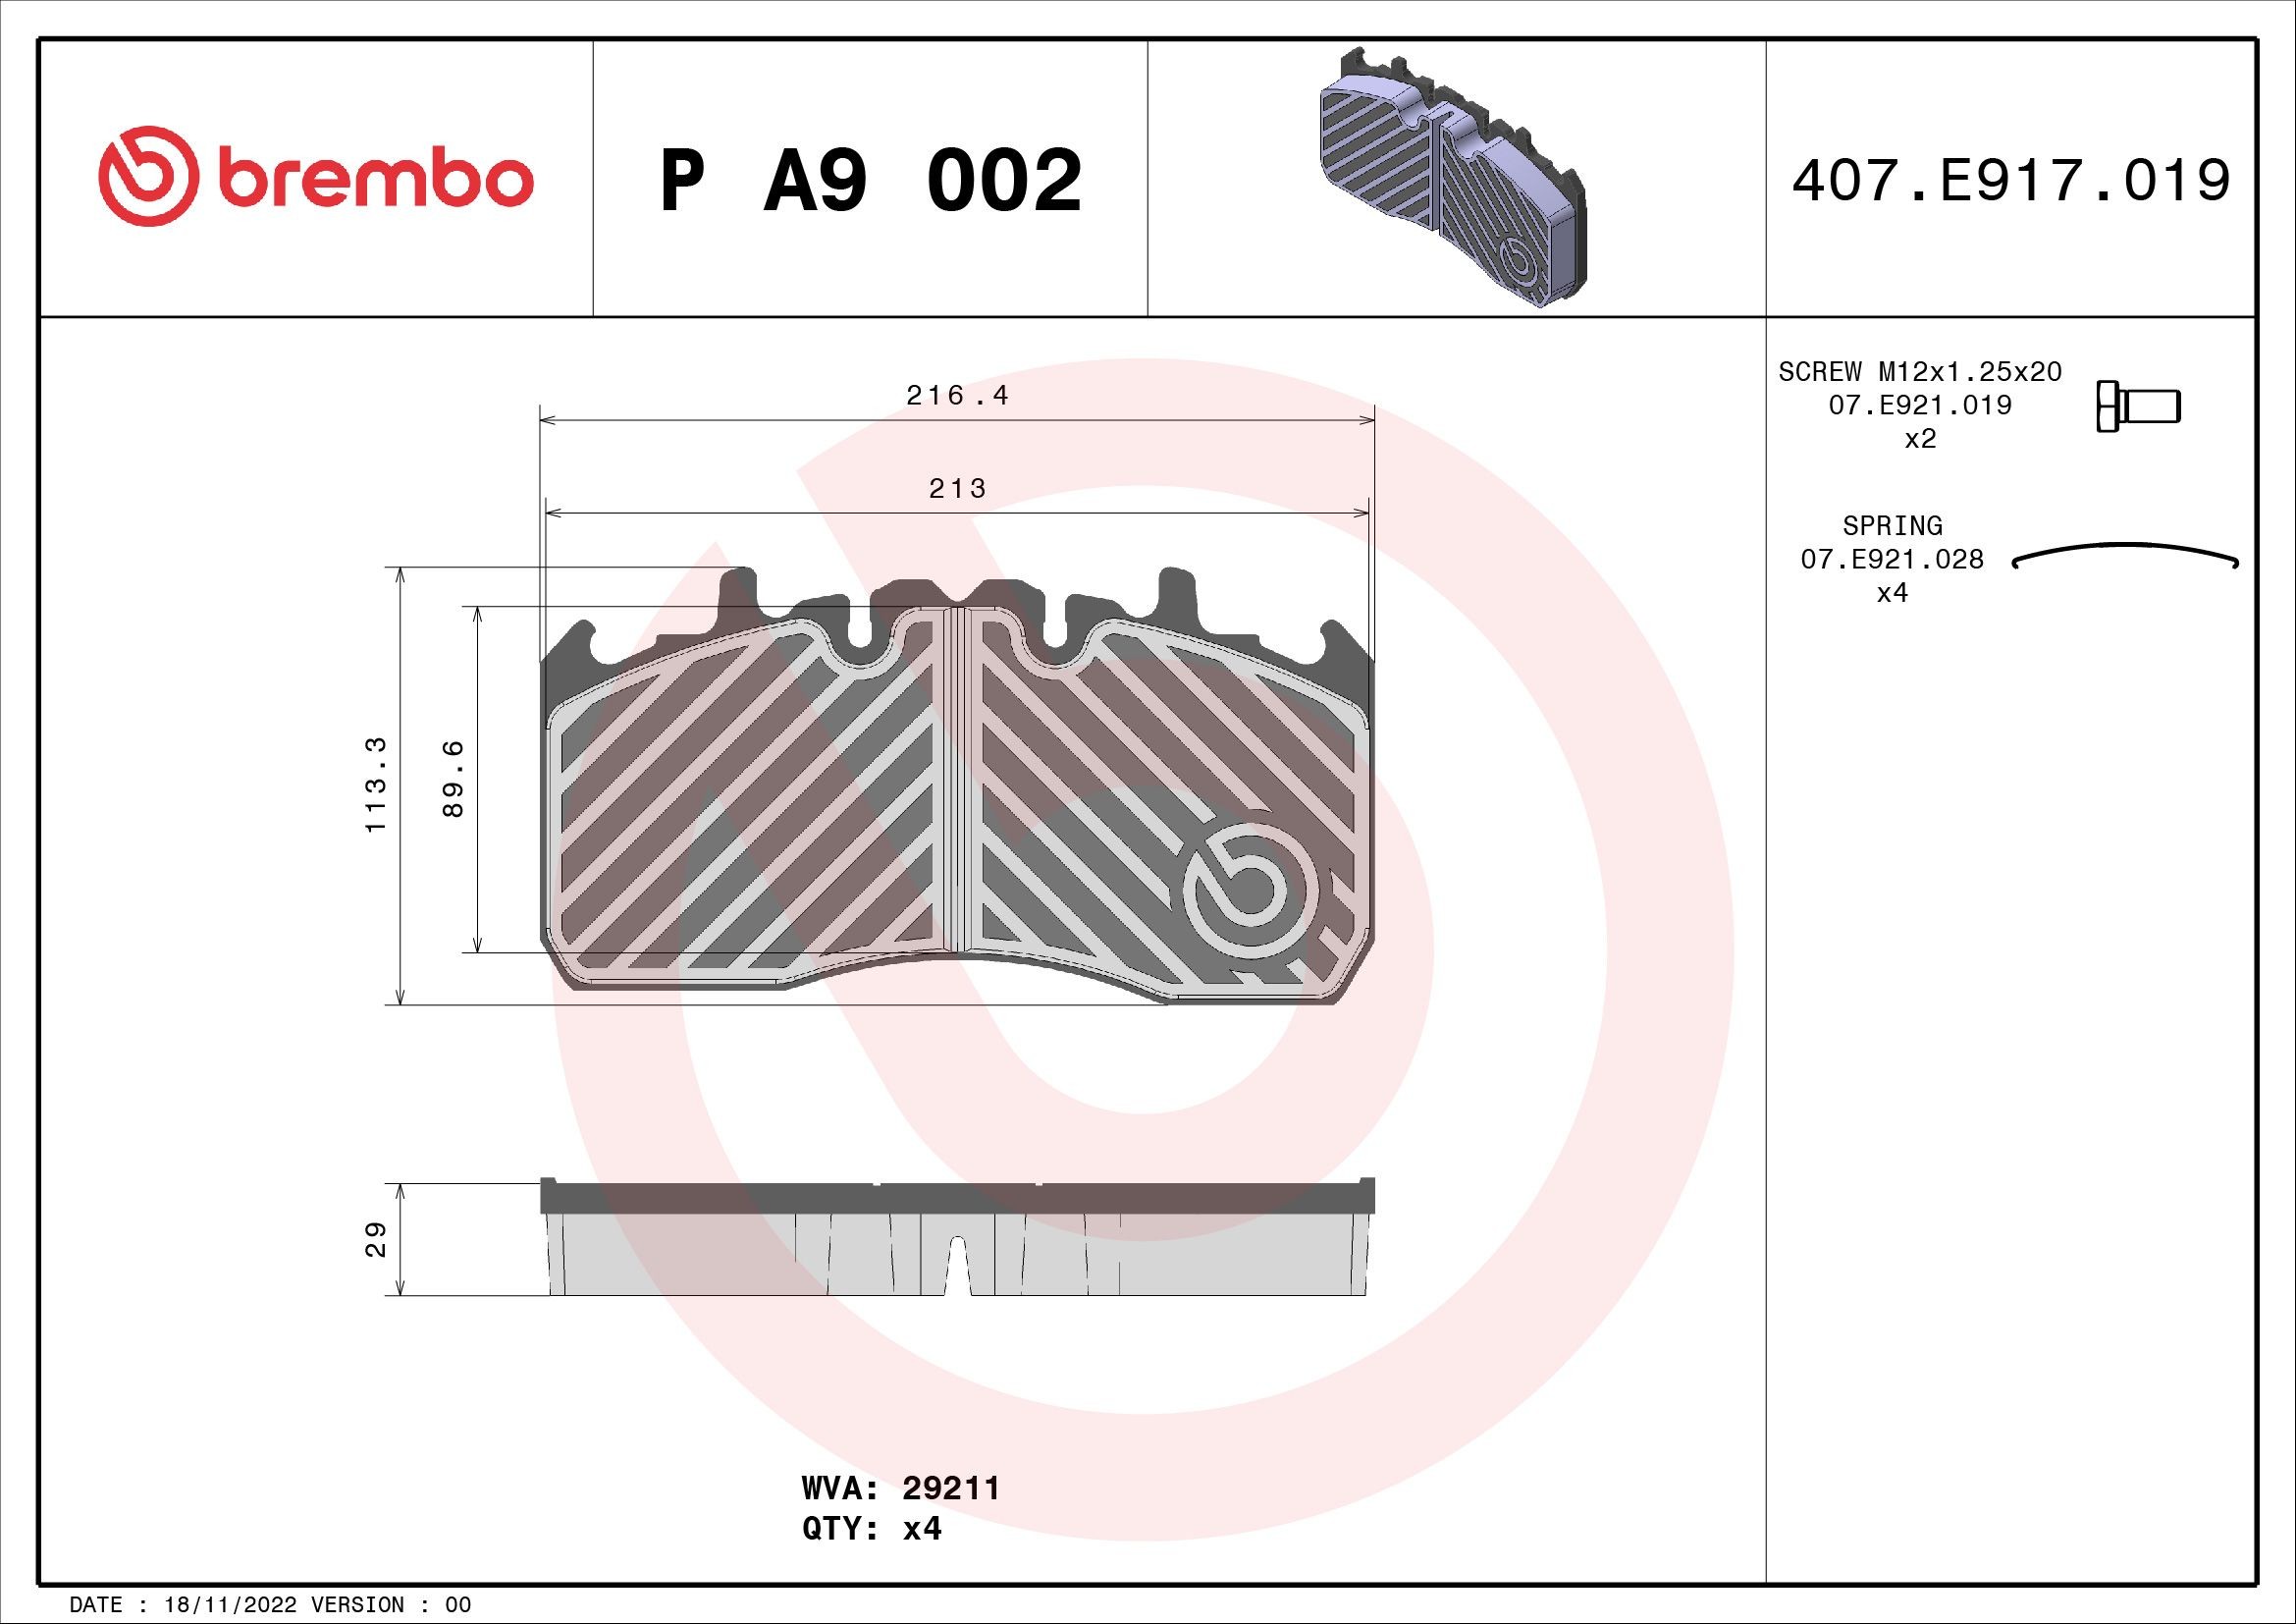 BREMBO P A9 002 Brake pad set prepared for wear indicator, with accessories